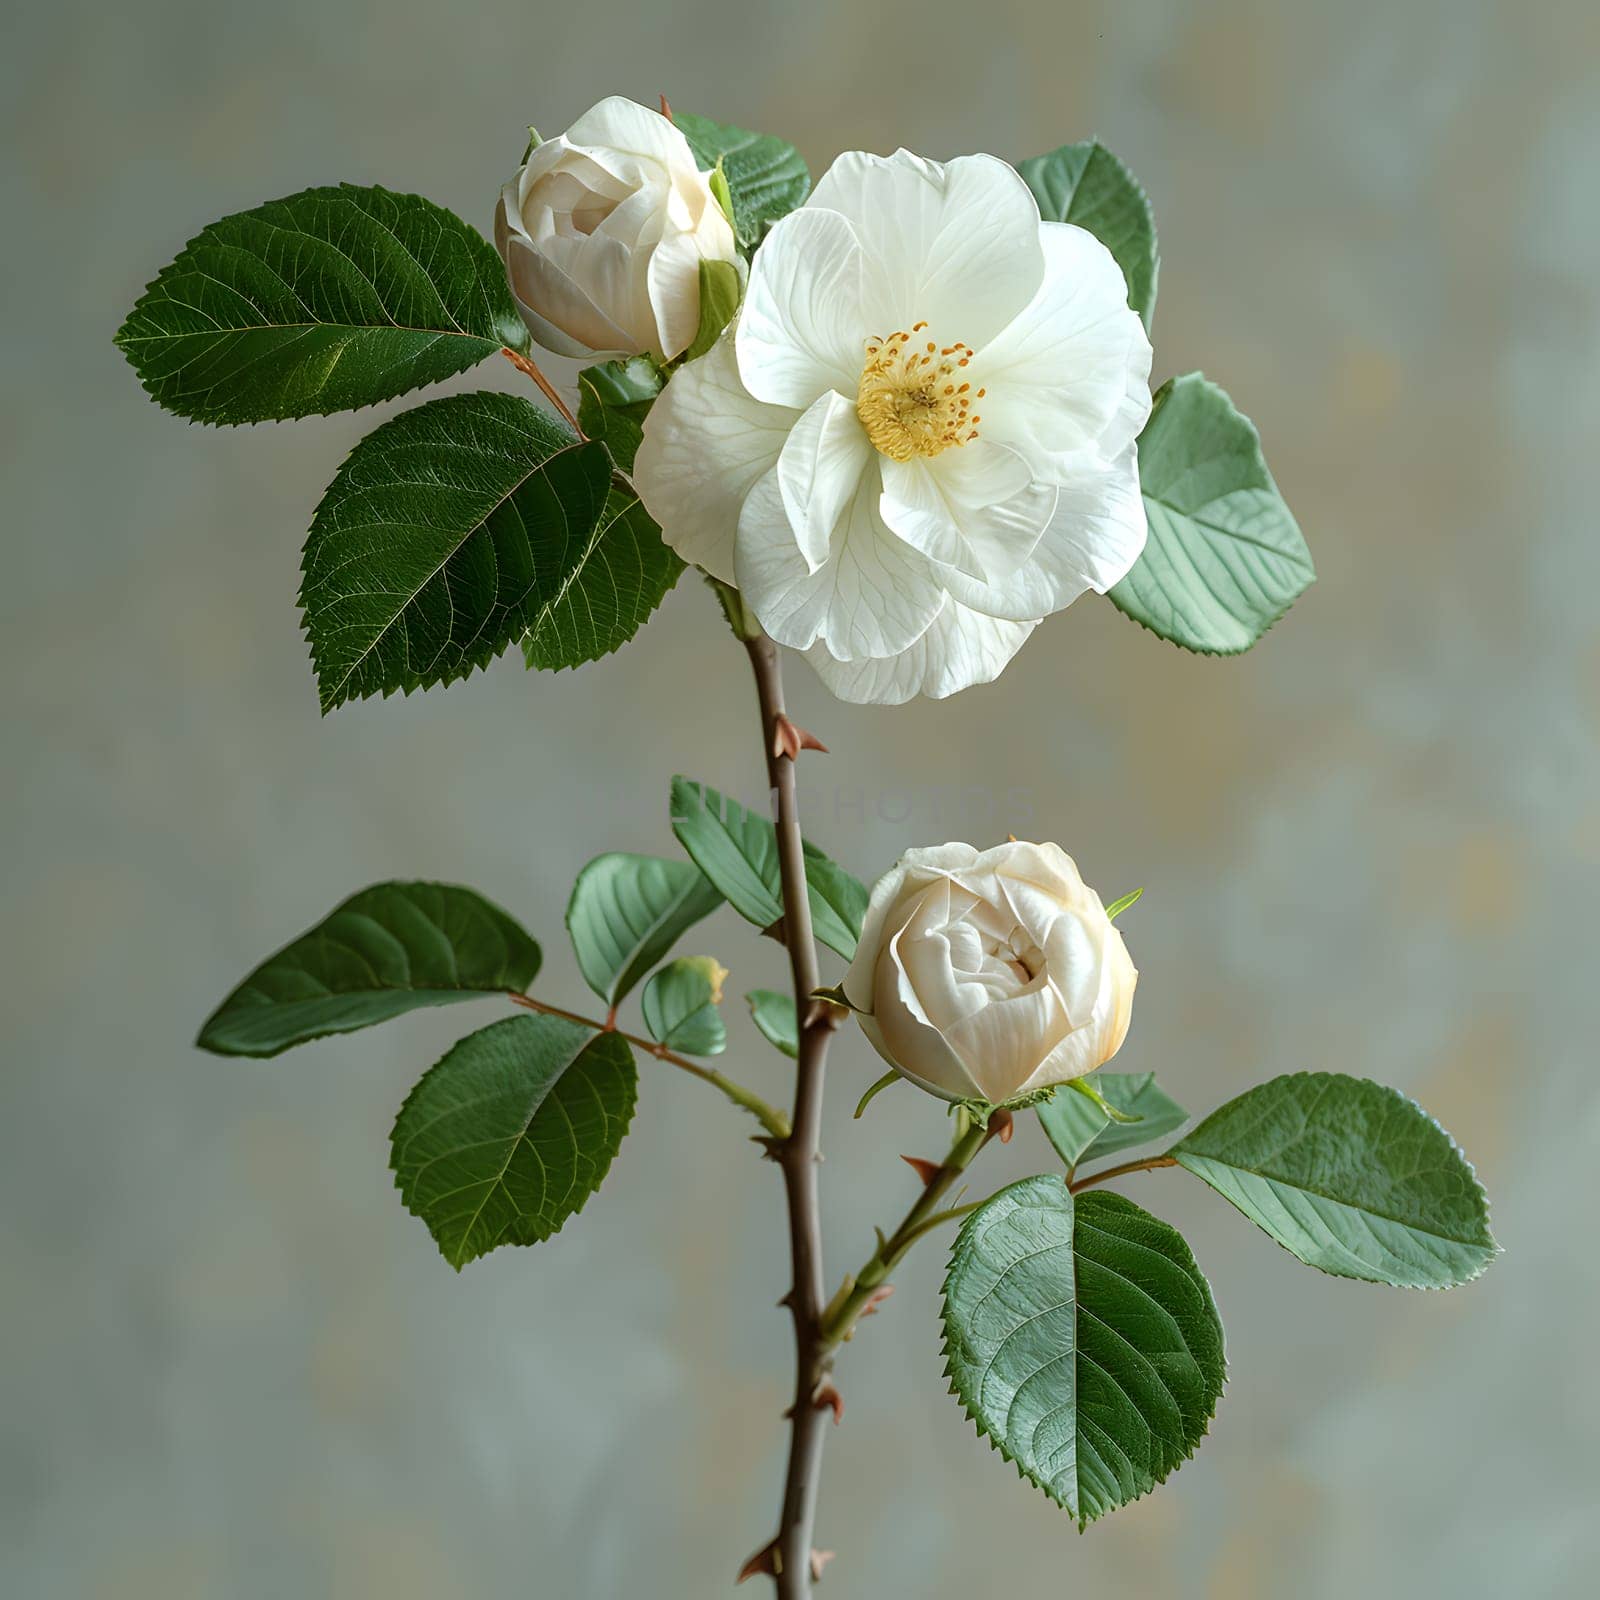 A white flower with a yellow center blooms among green leaves. This flower belongs to the Rose family and is a part of the Rose order, found on a twig of a subshrub